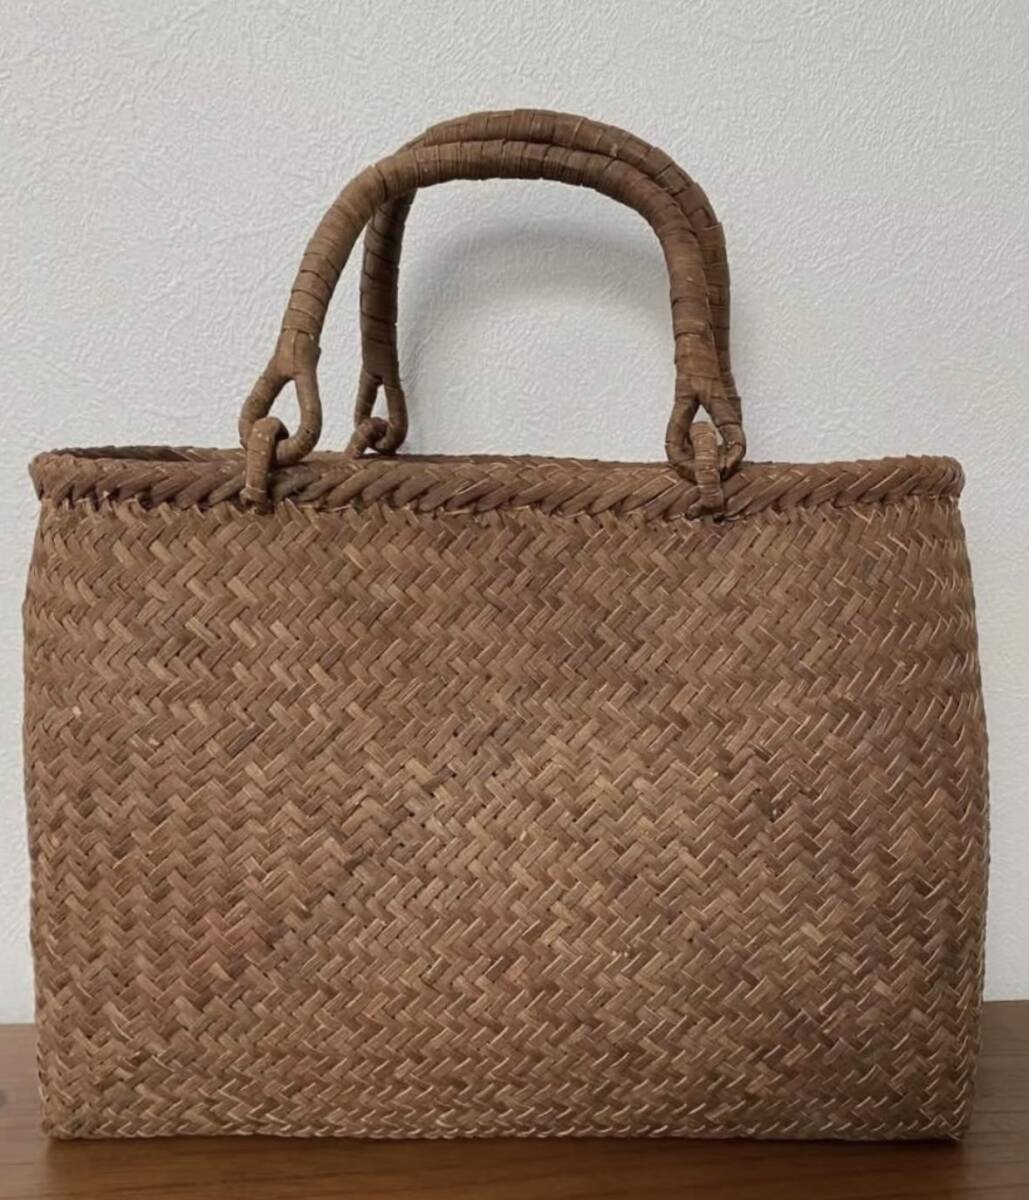  Nagano production unused goods most leather 3 millimeter . worker hand-knitted superfine braided mountain ... bag size XL